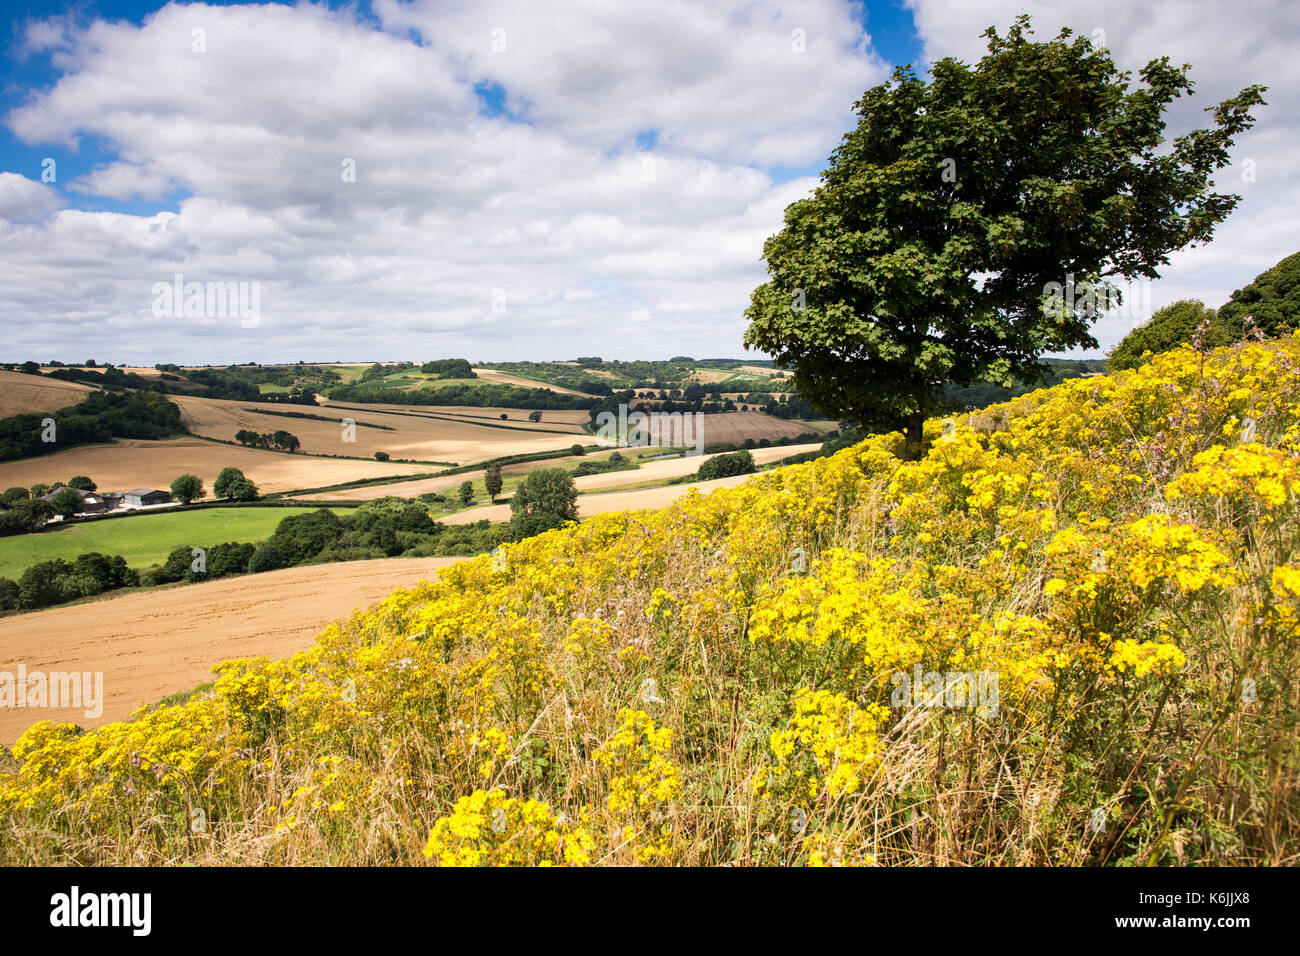 Fields of crops and pasture in the Cerne Valley, nestled in the rolling landscape of England's Dorset Downs. Stock Photo